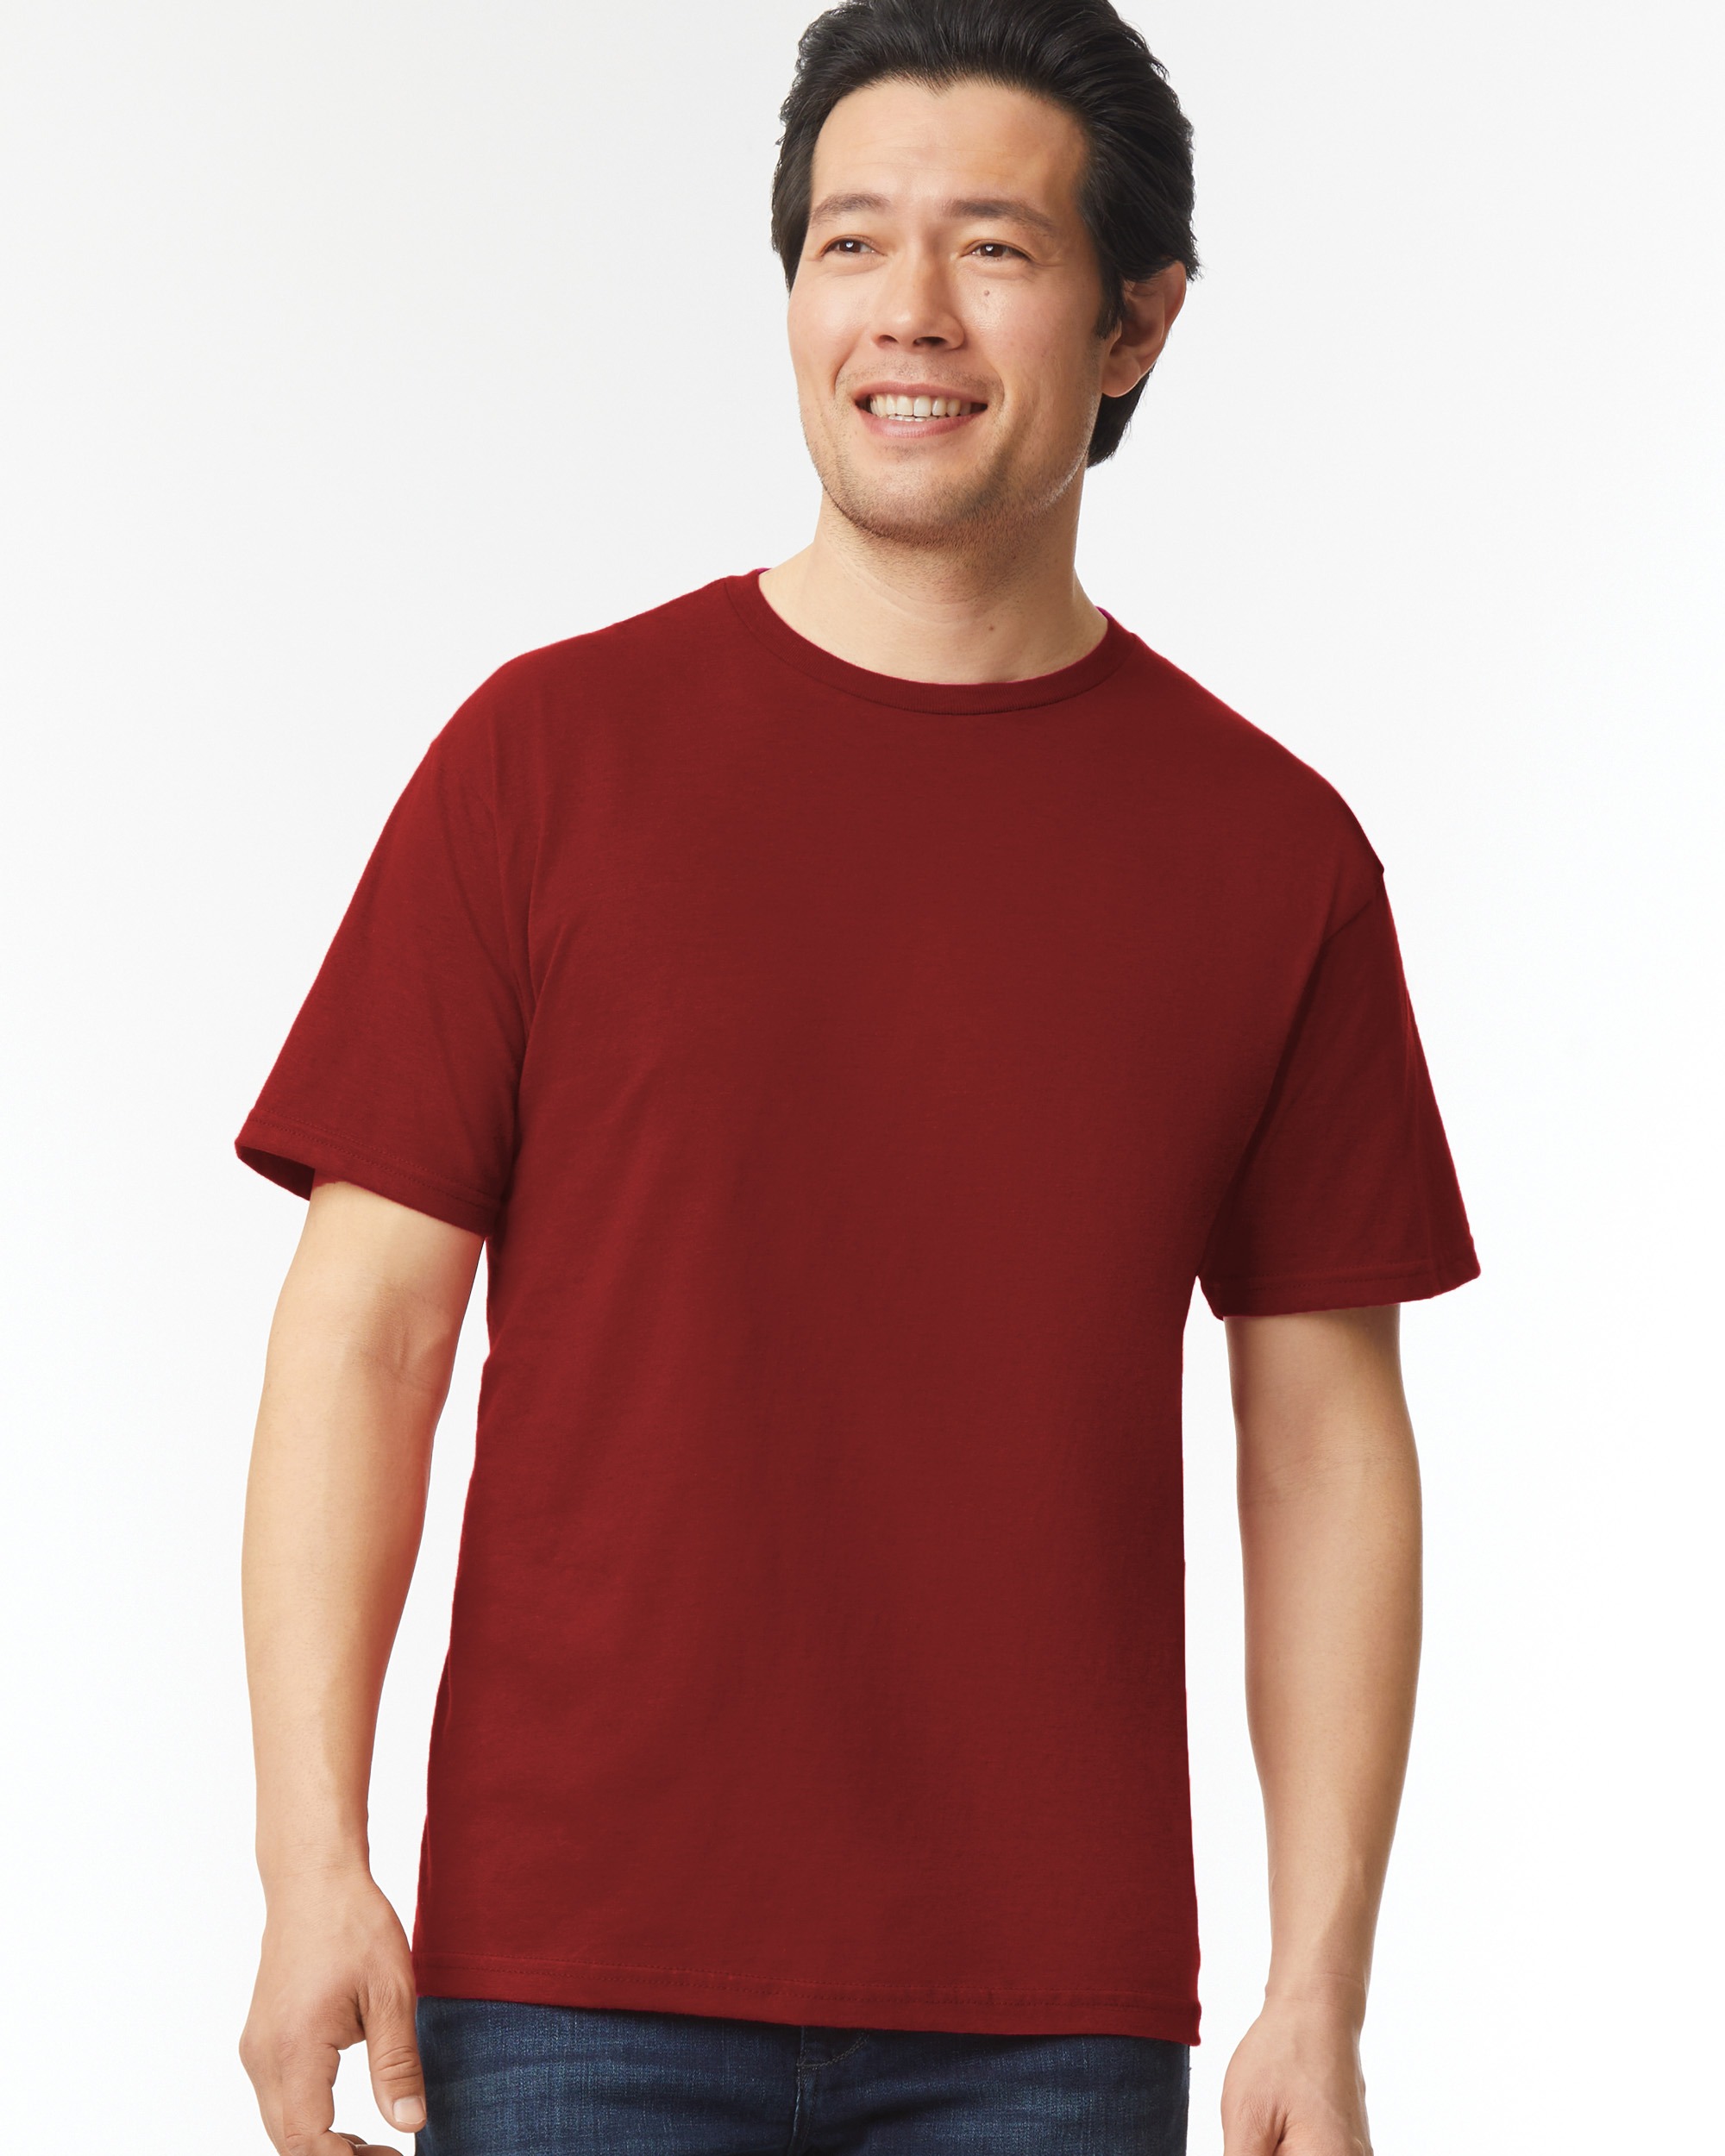 Gildan 64000 Softstyle Semi-fitted Adult T-Shirt - American Printworks